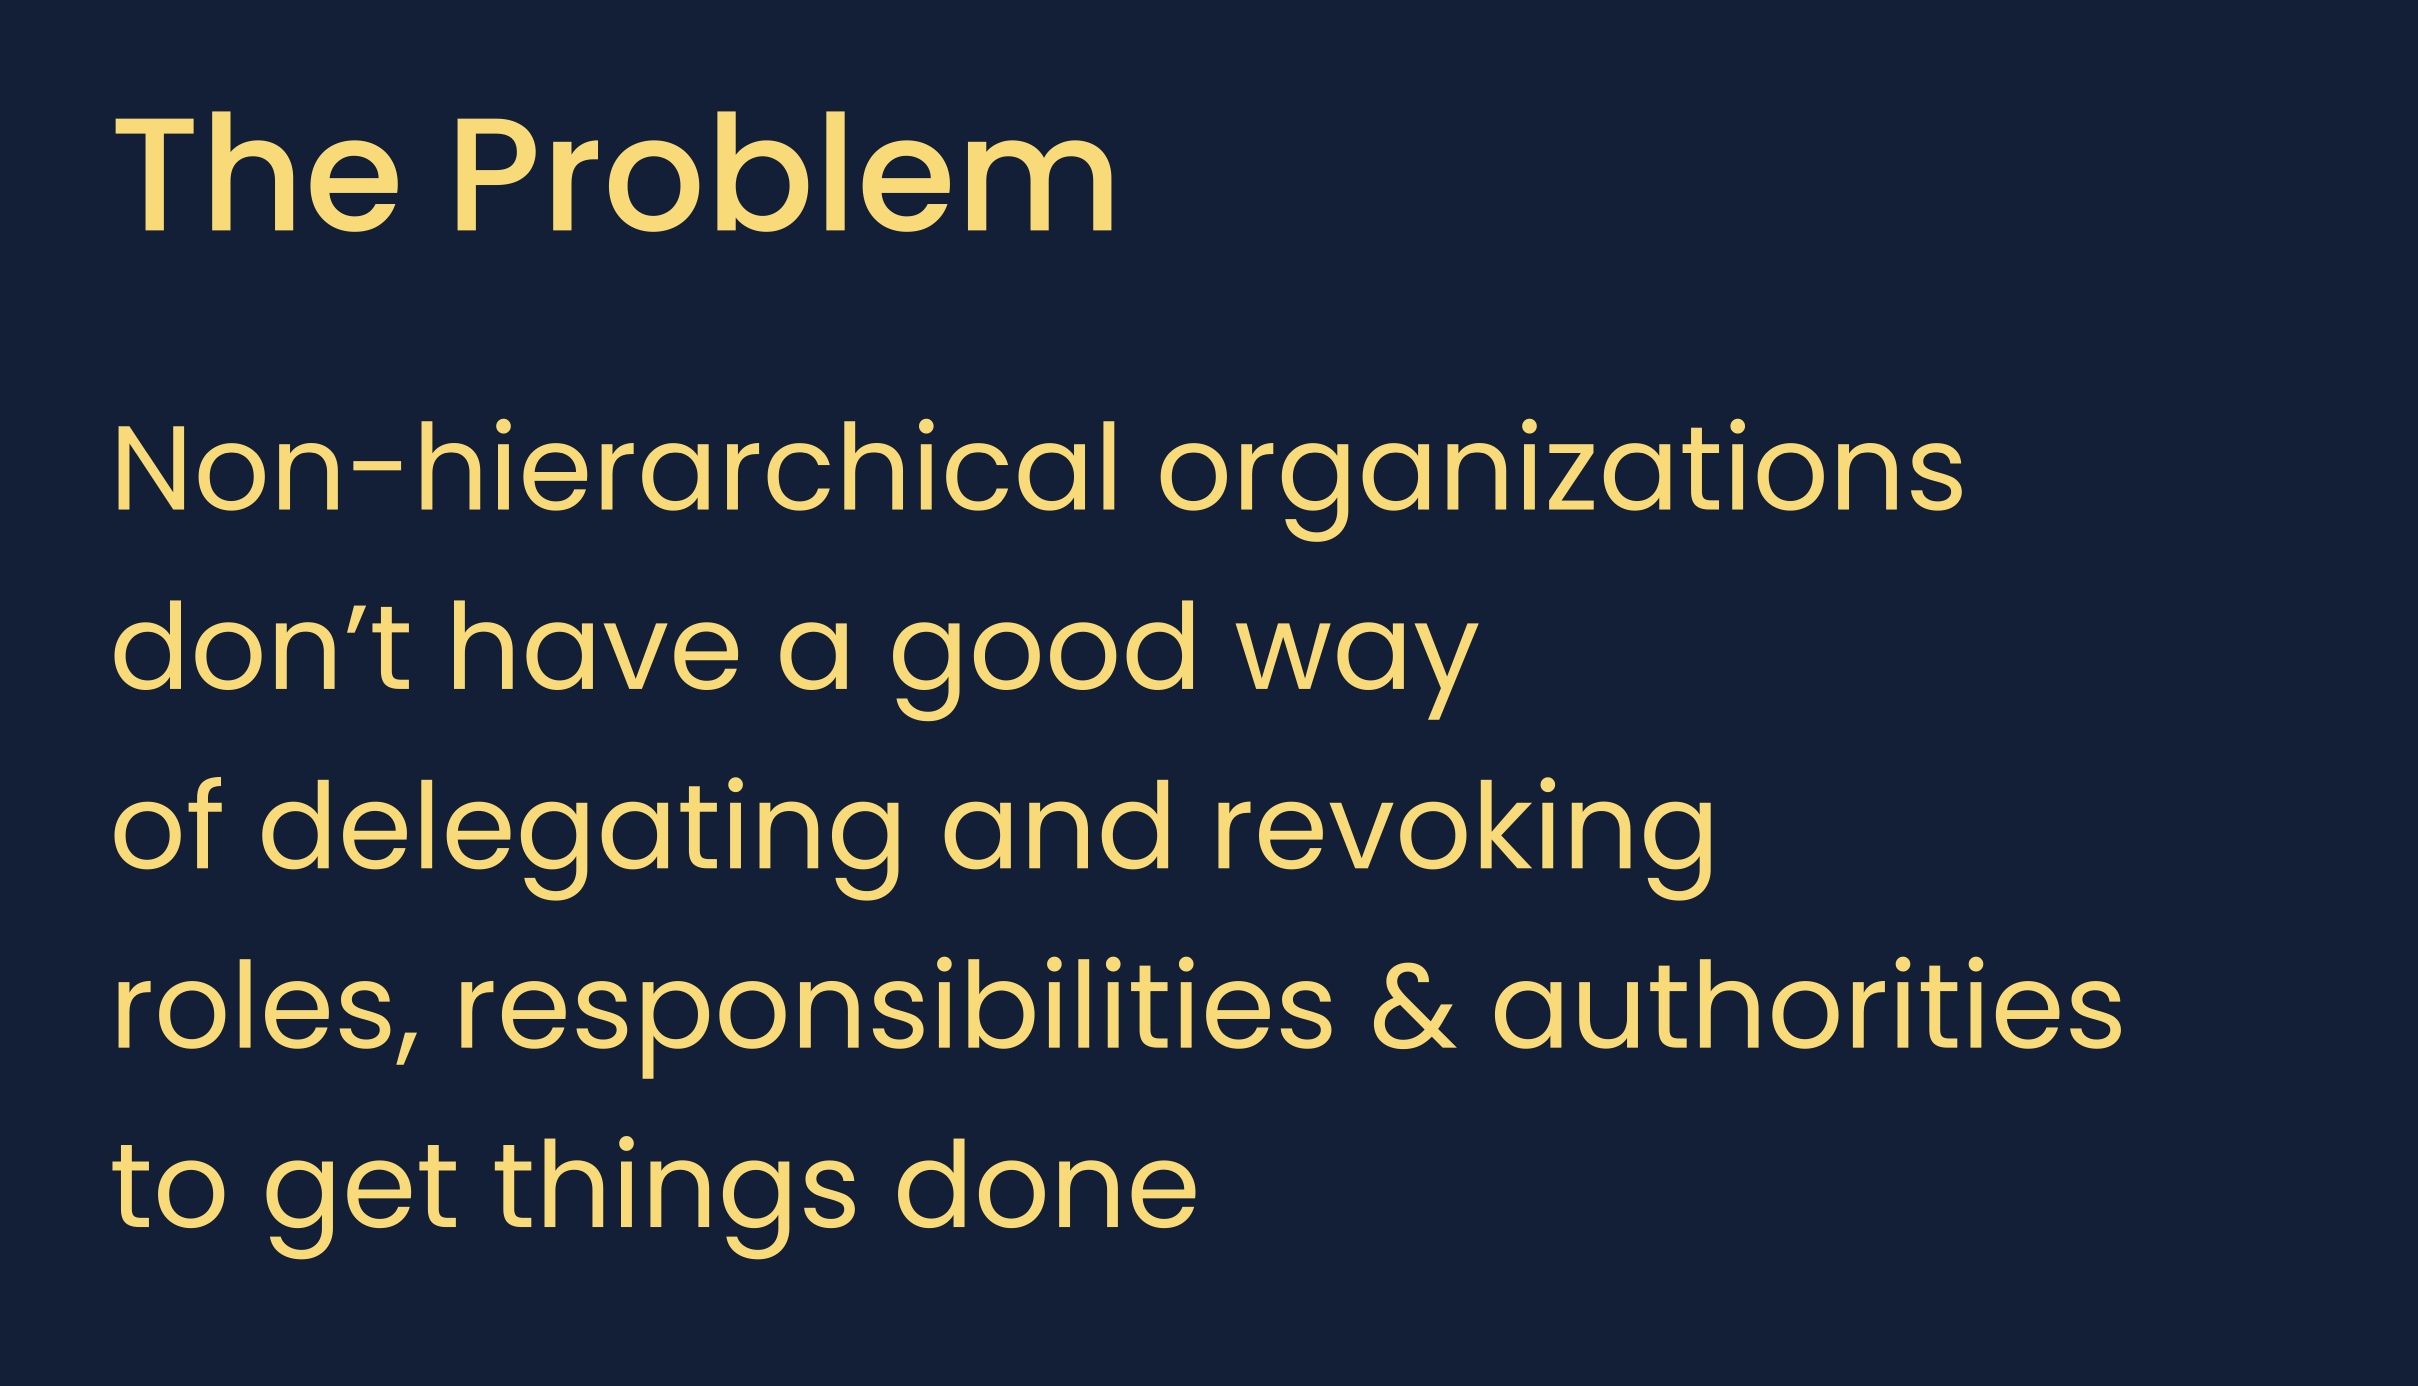 A major challenge of all non-hierarchical organizations (like DAOs)